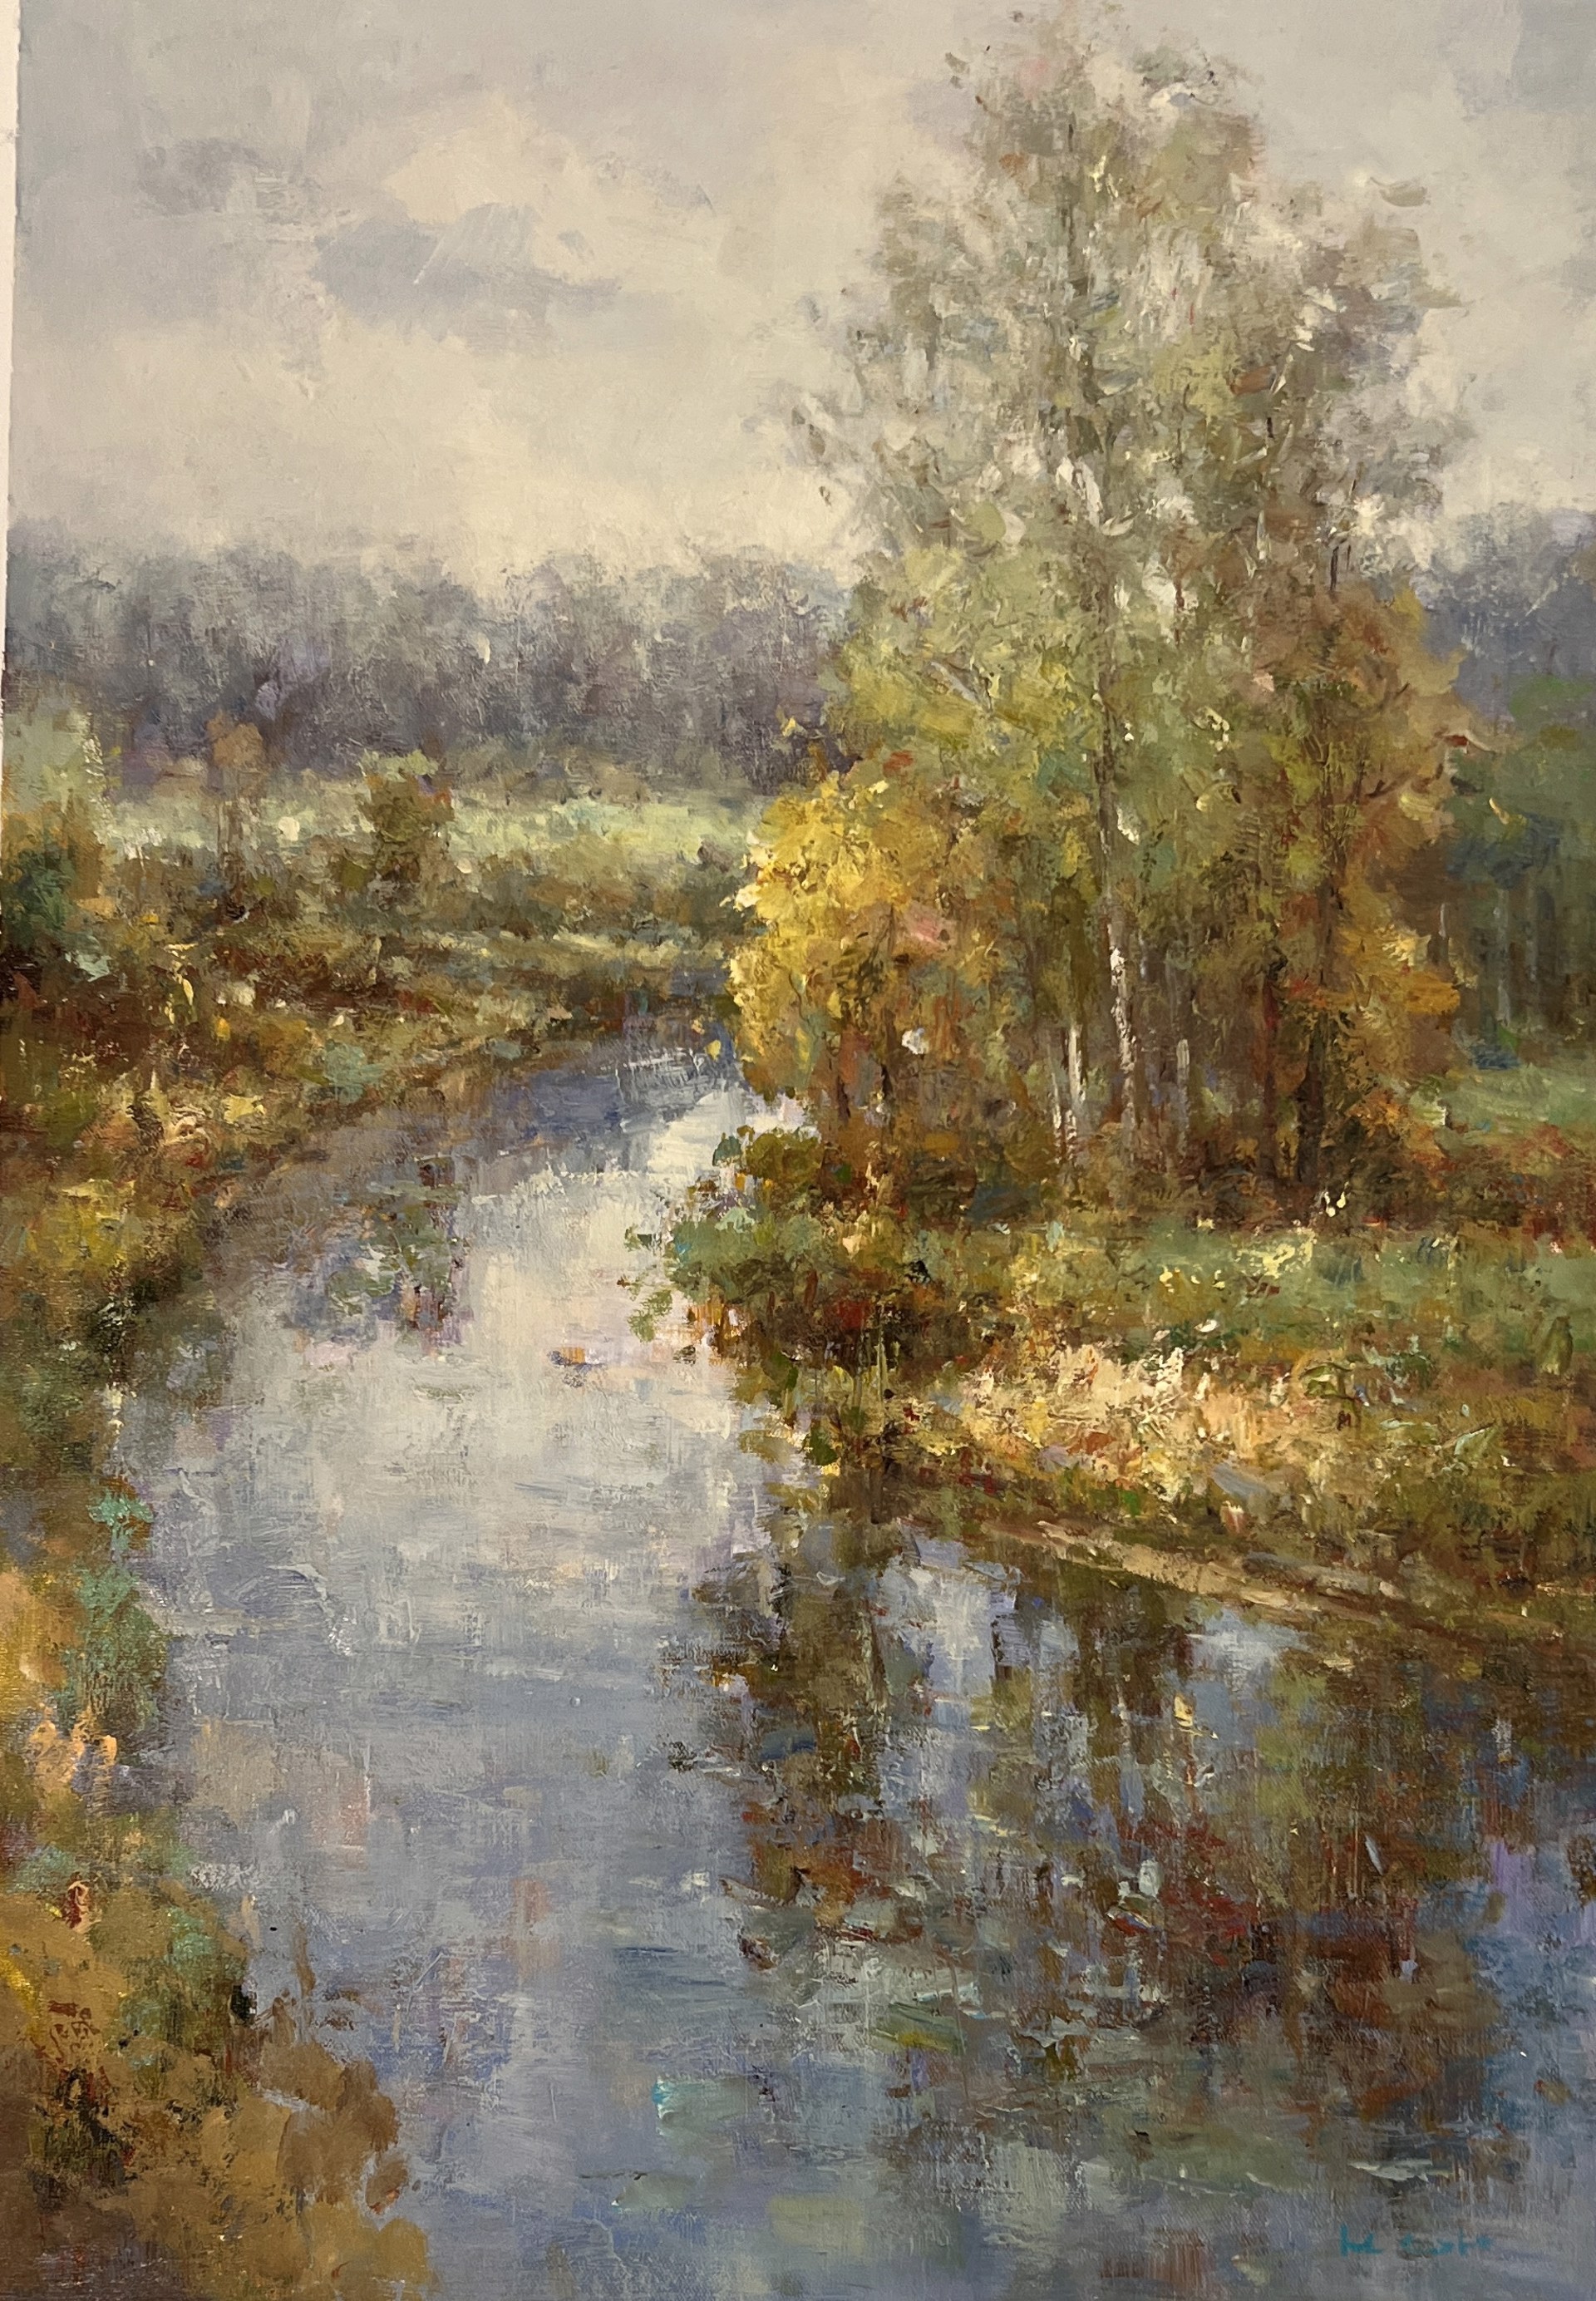 BEND IN THE CREEK II by H COLE